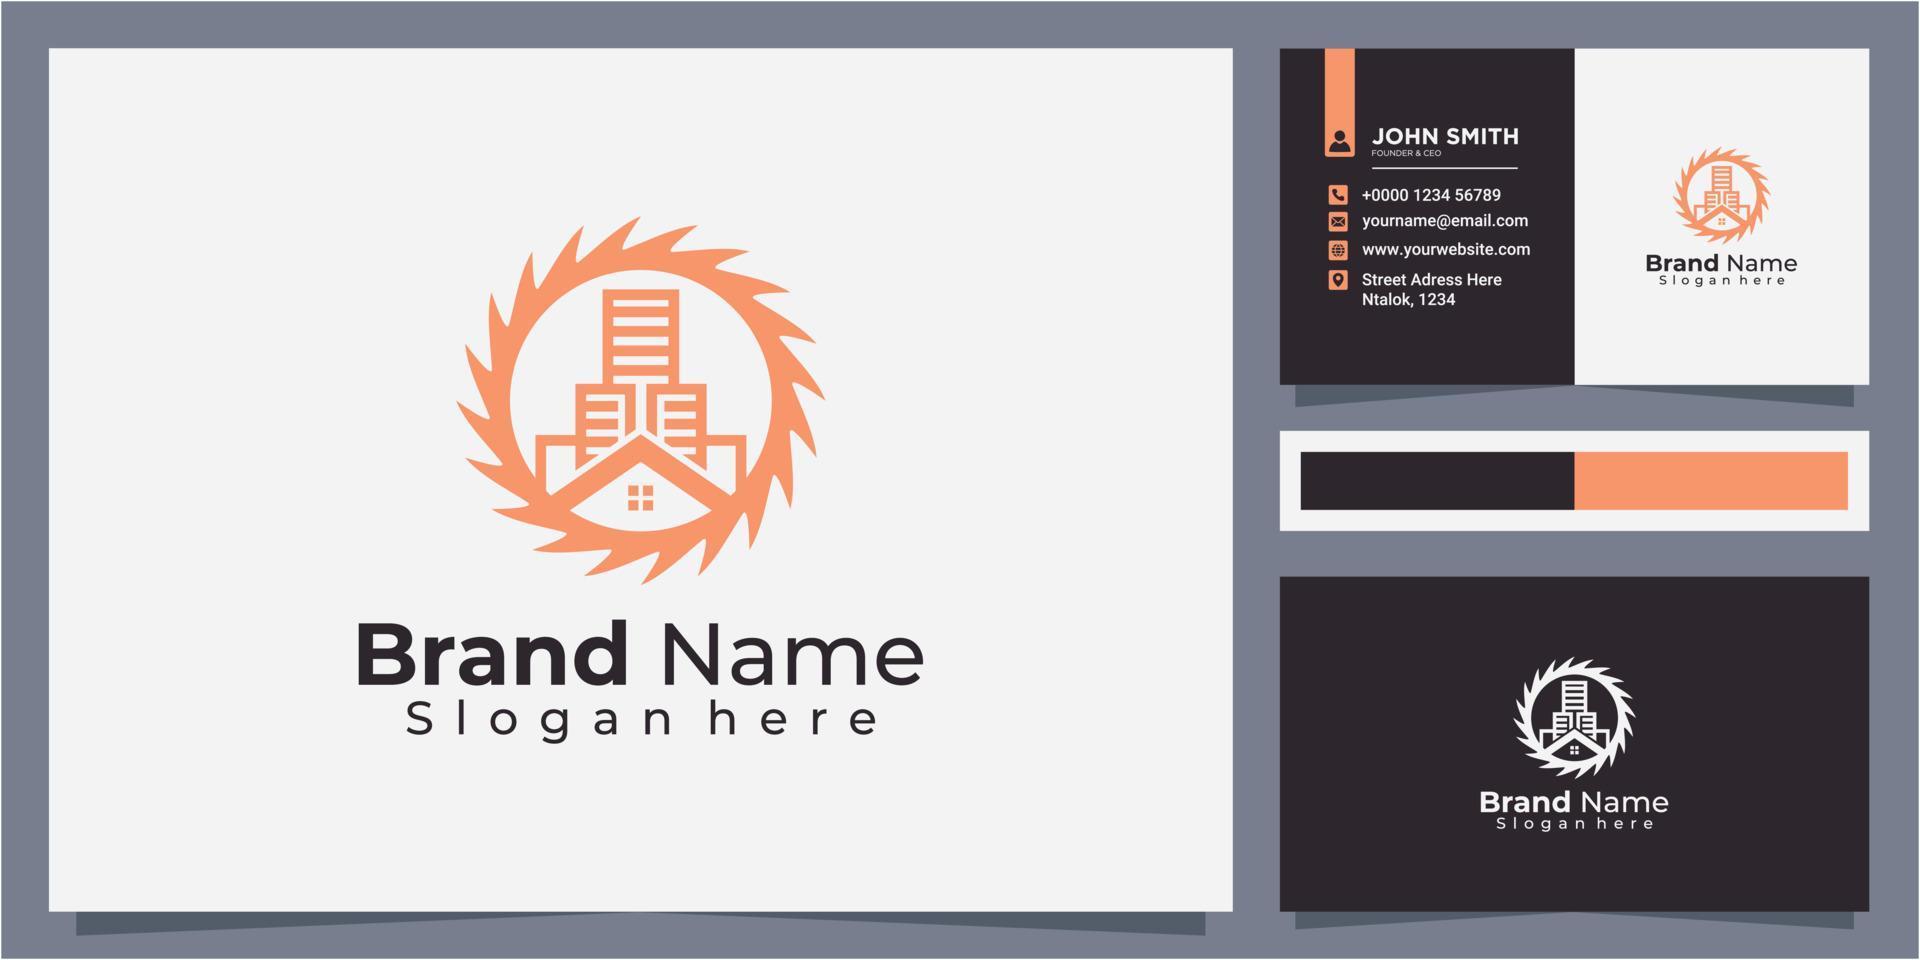 Creative building real estate combine with circle saw logo design vector with business card